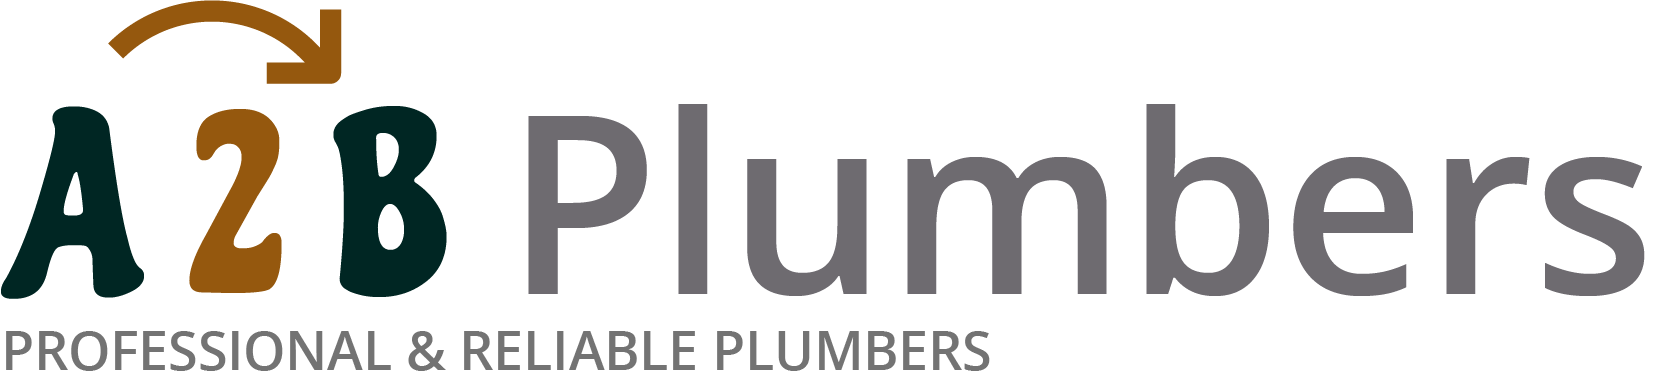 If you need a boiler installed, a radiator repaired or a leaking tap fixed, call us now - we provide services for properties in Lydiate and the local area.